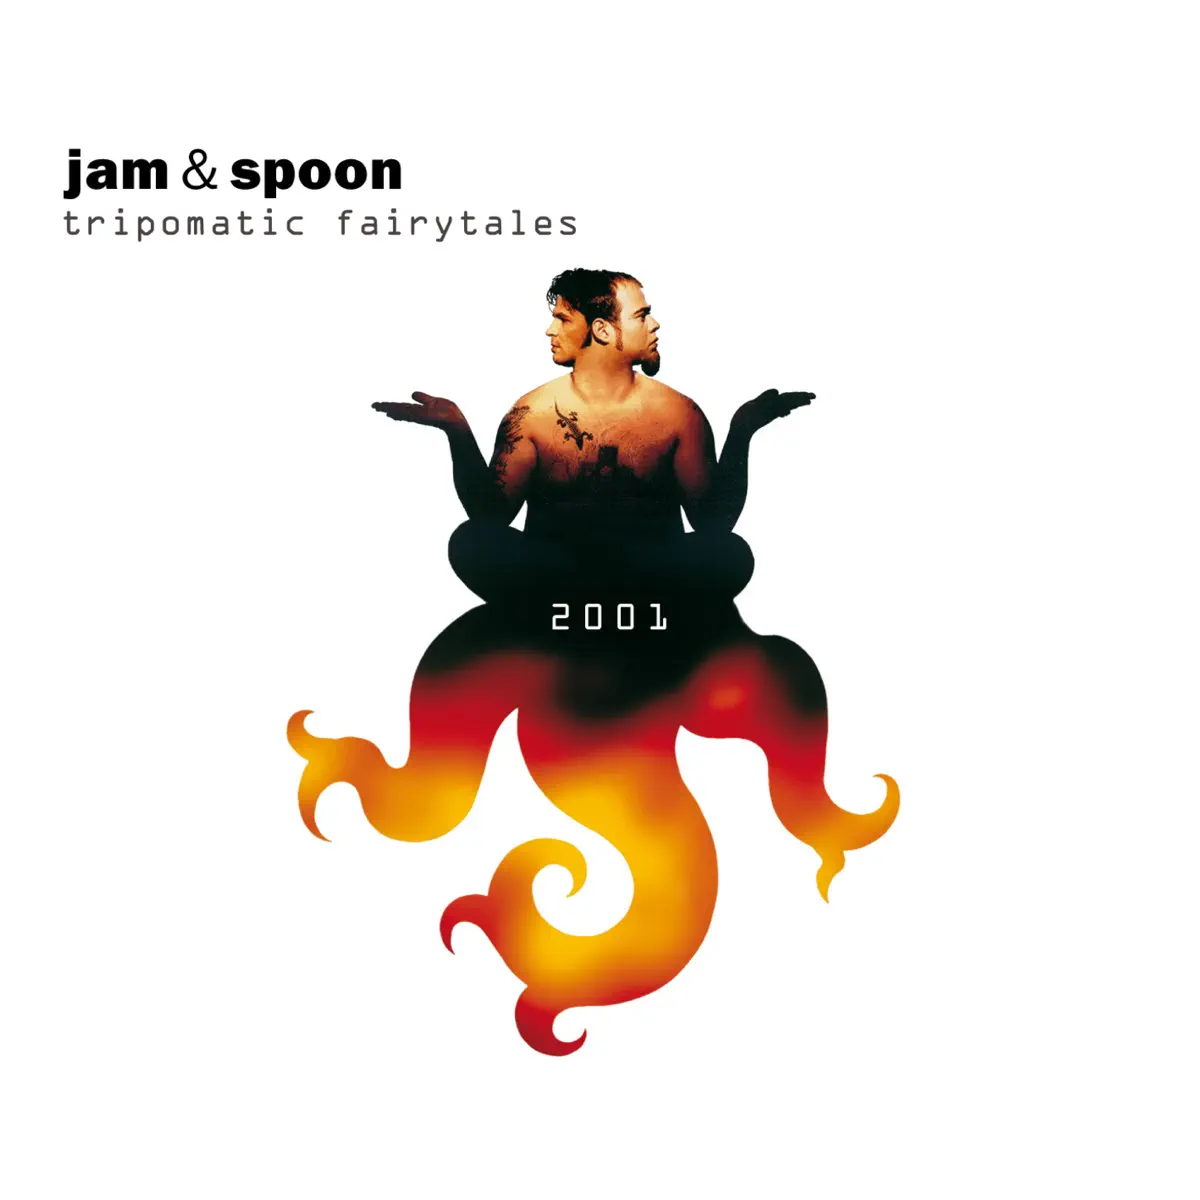 Jam & Spoon - Tripomatic Fairytales 2001 (Deluxe Edition) (2013) [iTunes Plus AAC M4A]-新房子